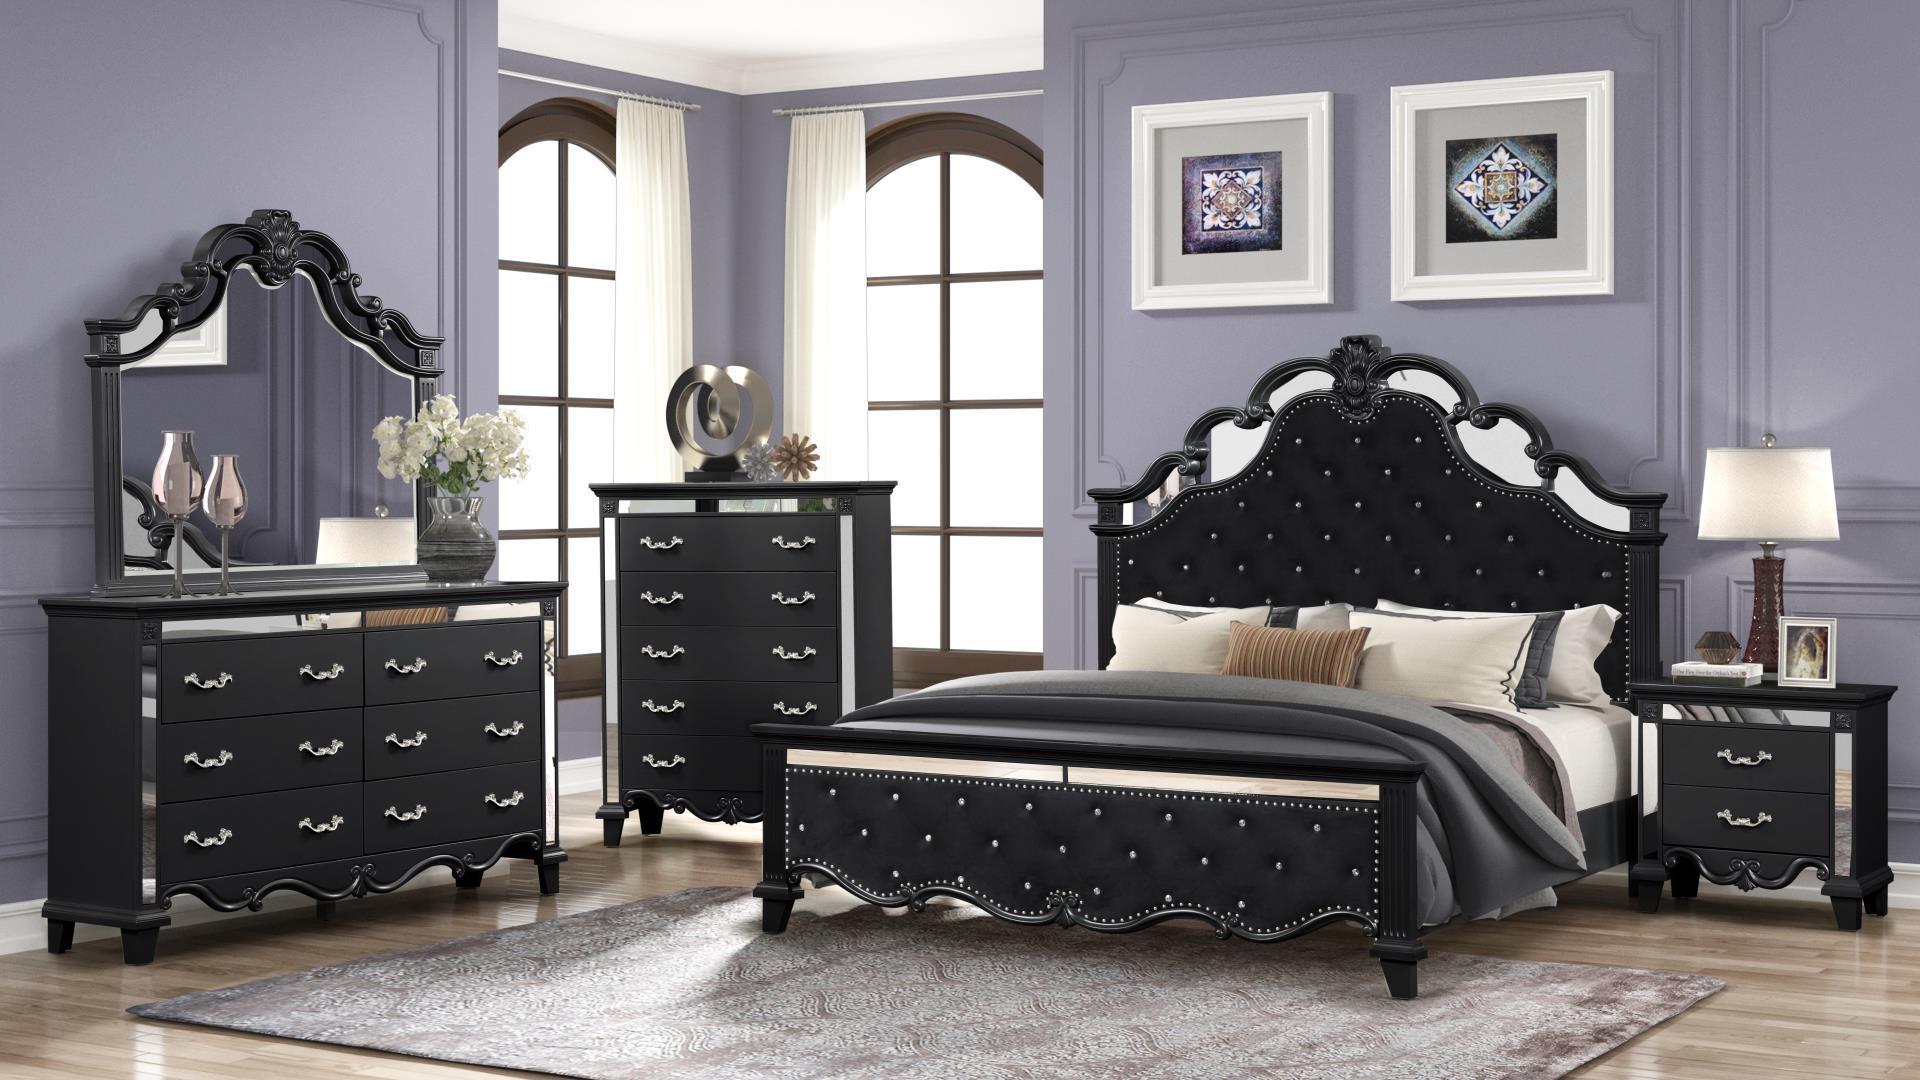 

    
Glam Black Tufted King Bed MILAN Galaxy Home Contemporary Modern
